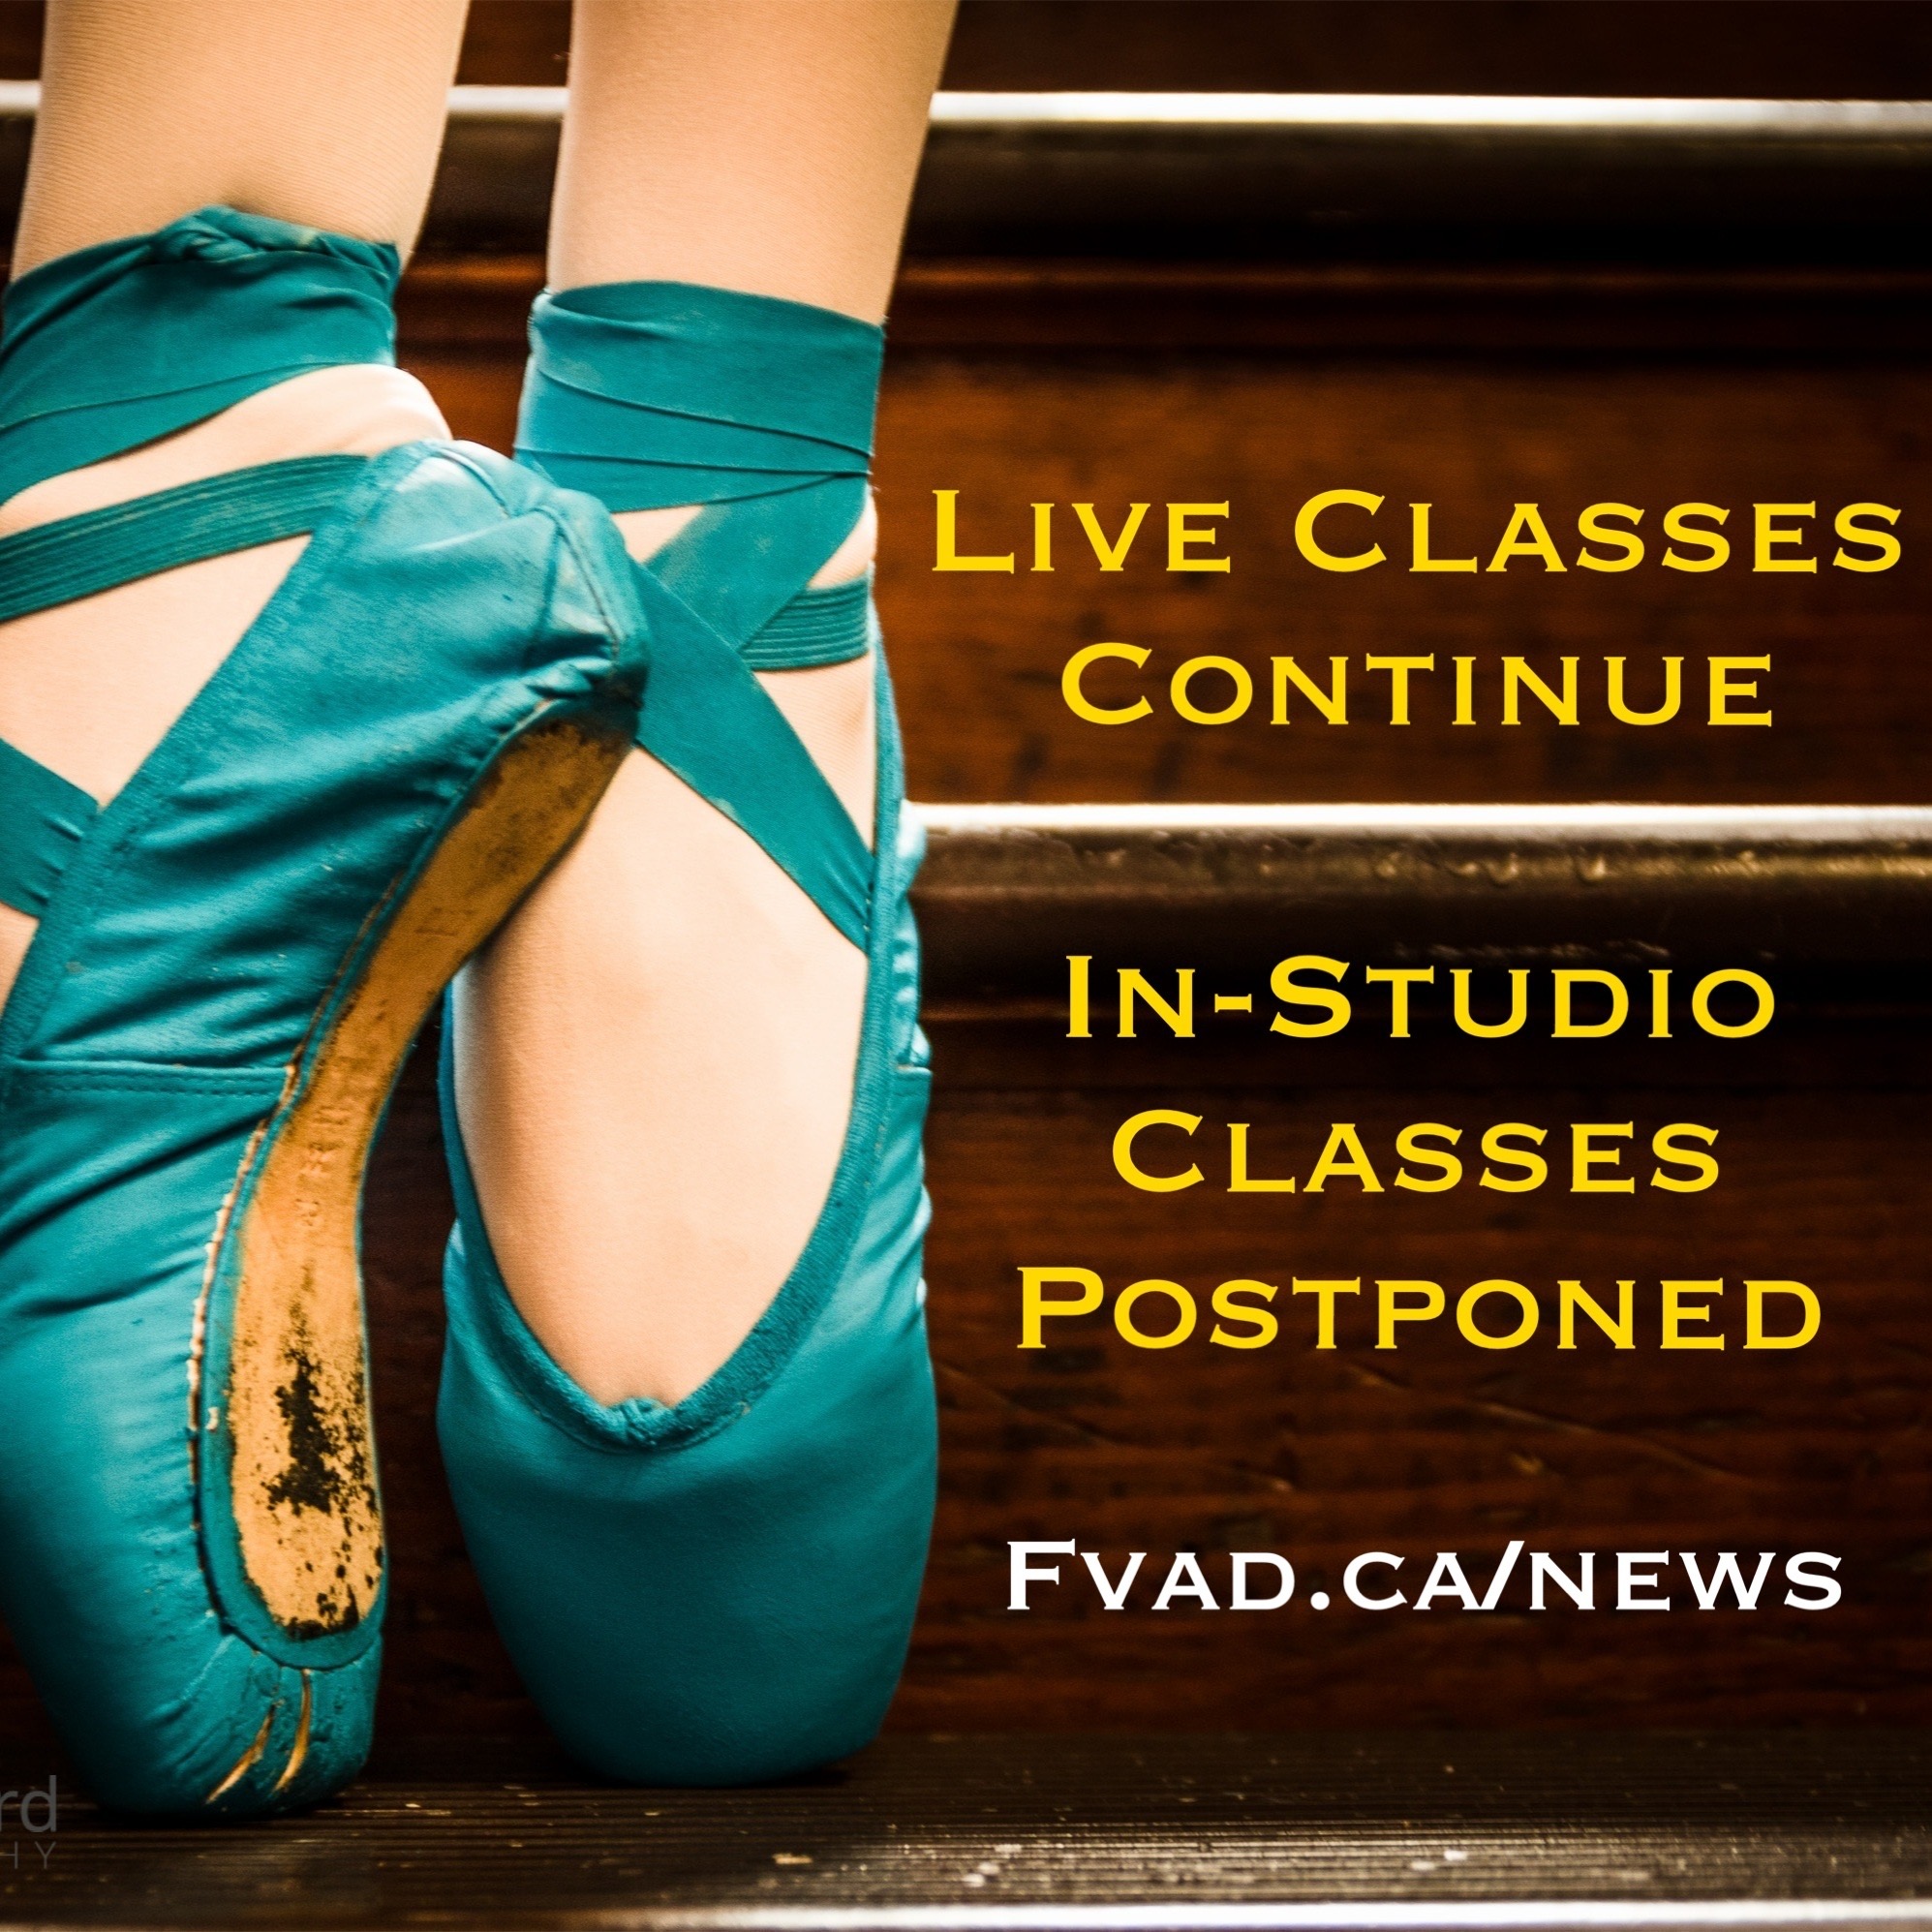 Closure extended to July 1. Live classes continue.